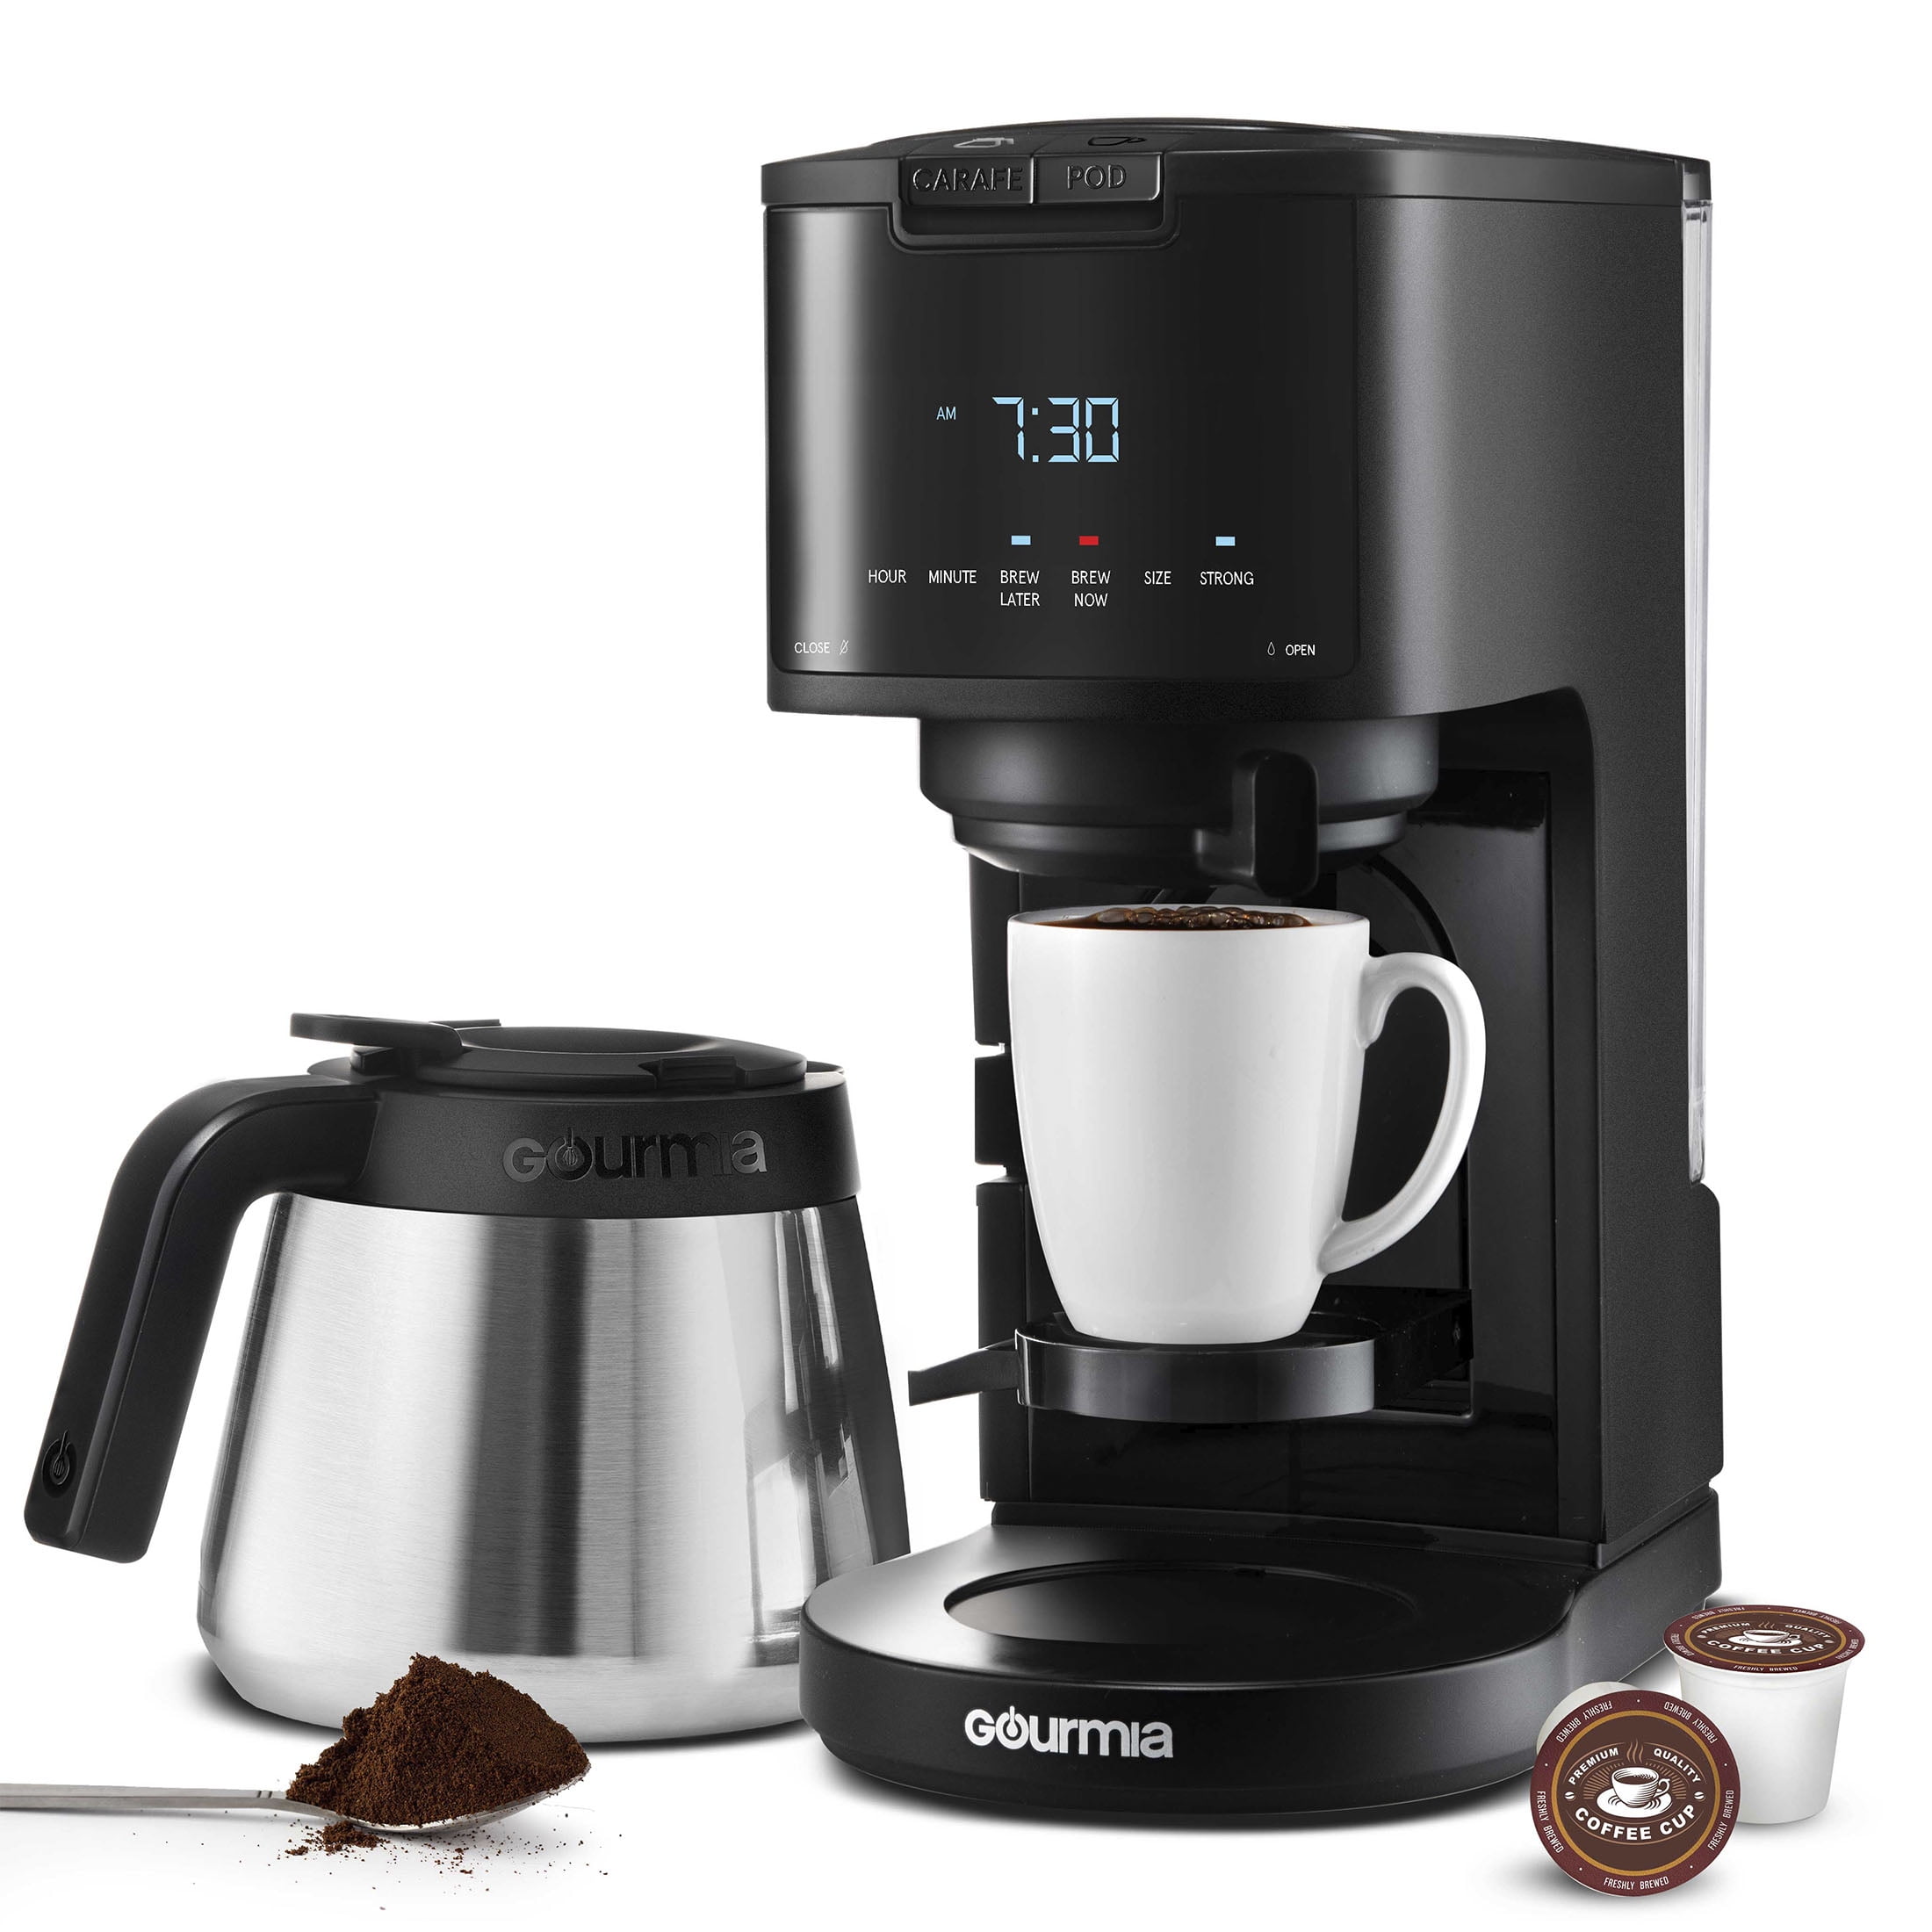 Top Dual Coffee Makers: Unveiling the Best Two-Way Coffee Brewer